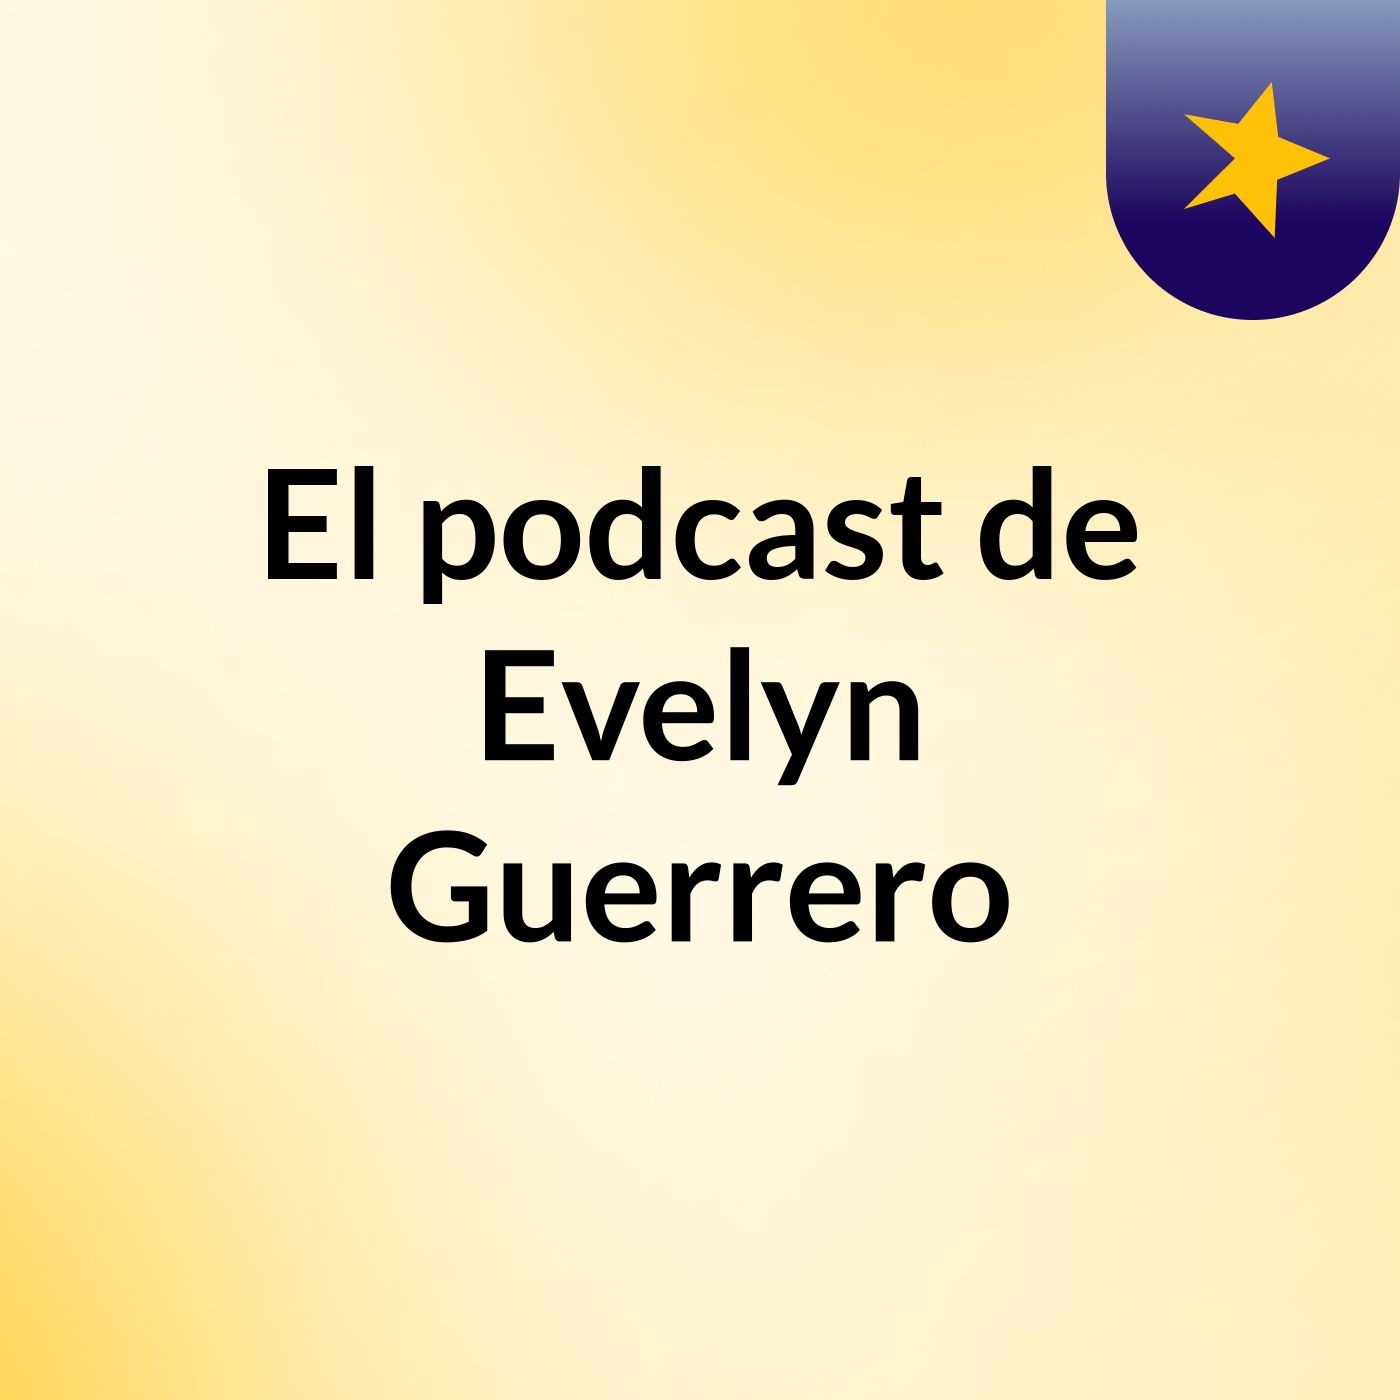 Evelyn guerrero images